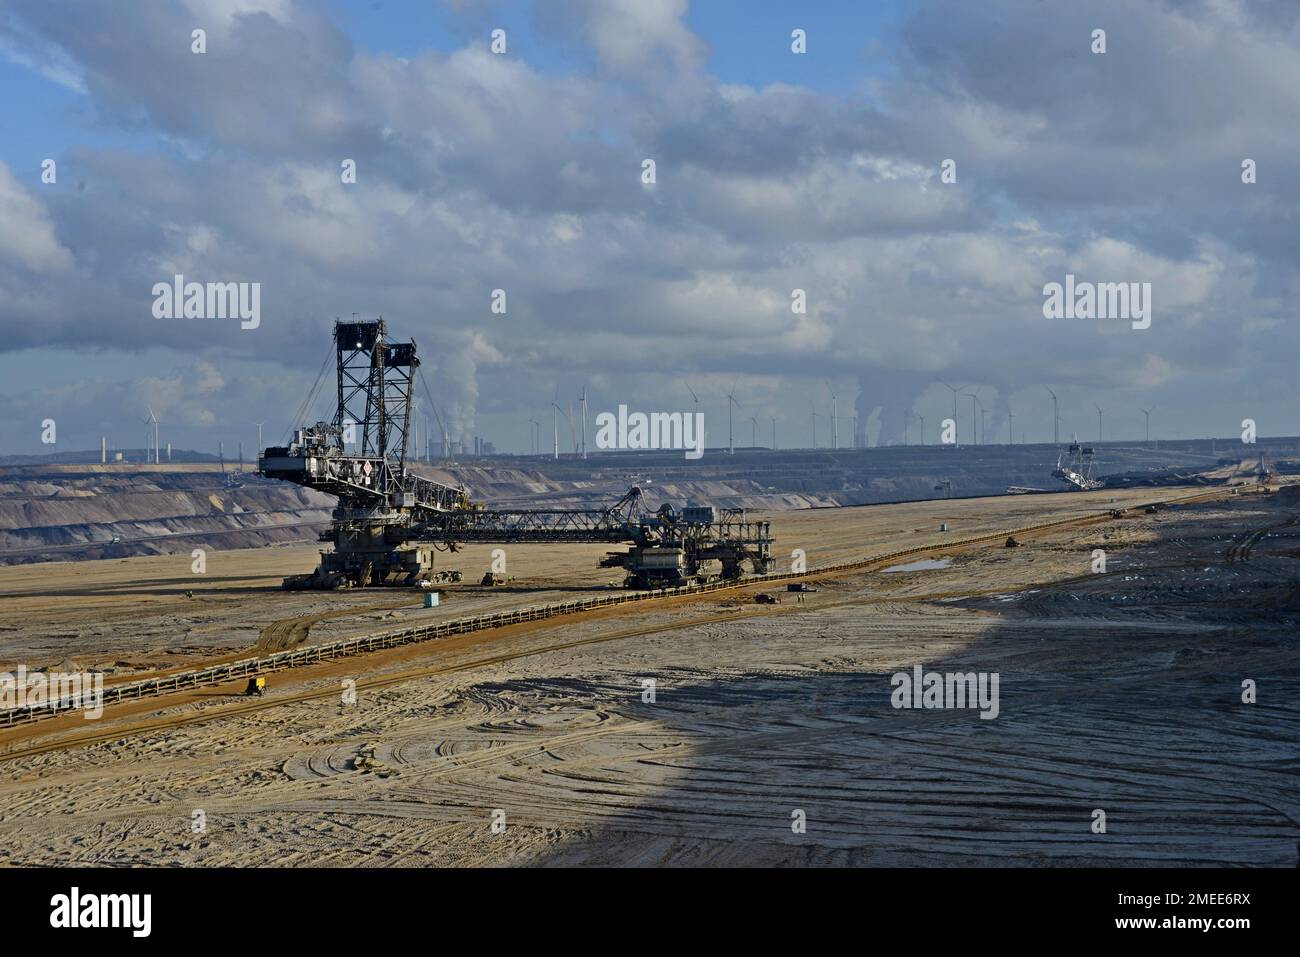 Giant bucket wheel excavator in Garzweiler mine, Germany, digging lignite brown coal for Neurath power station, sites of protests re climate change Stock Photo